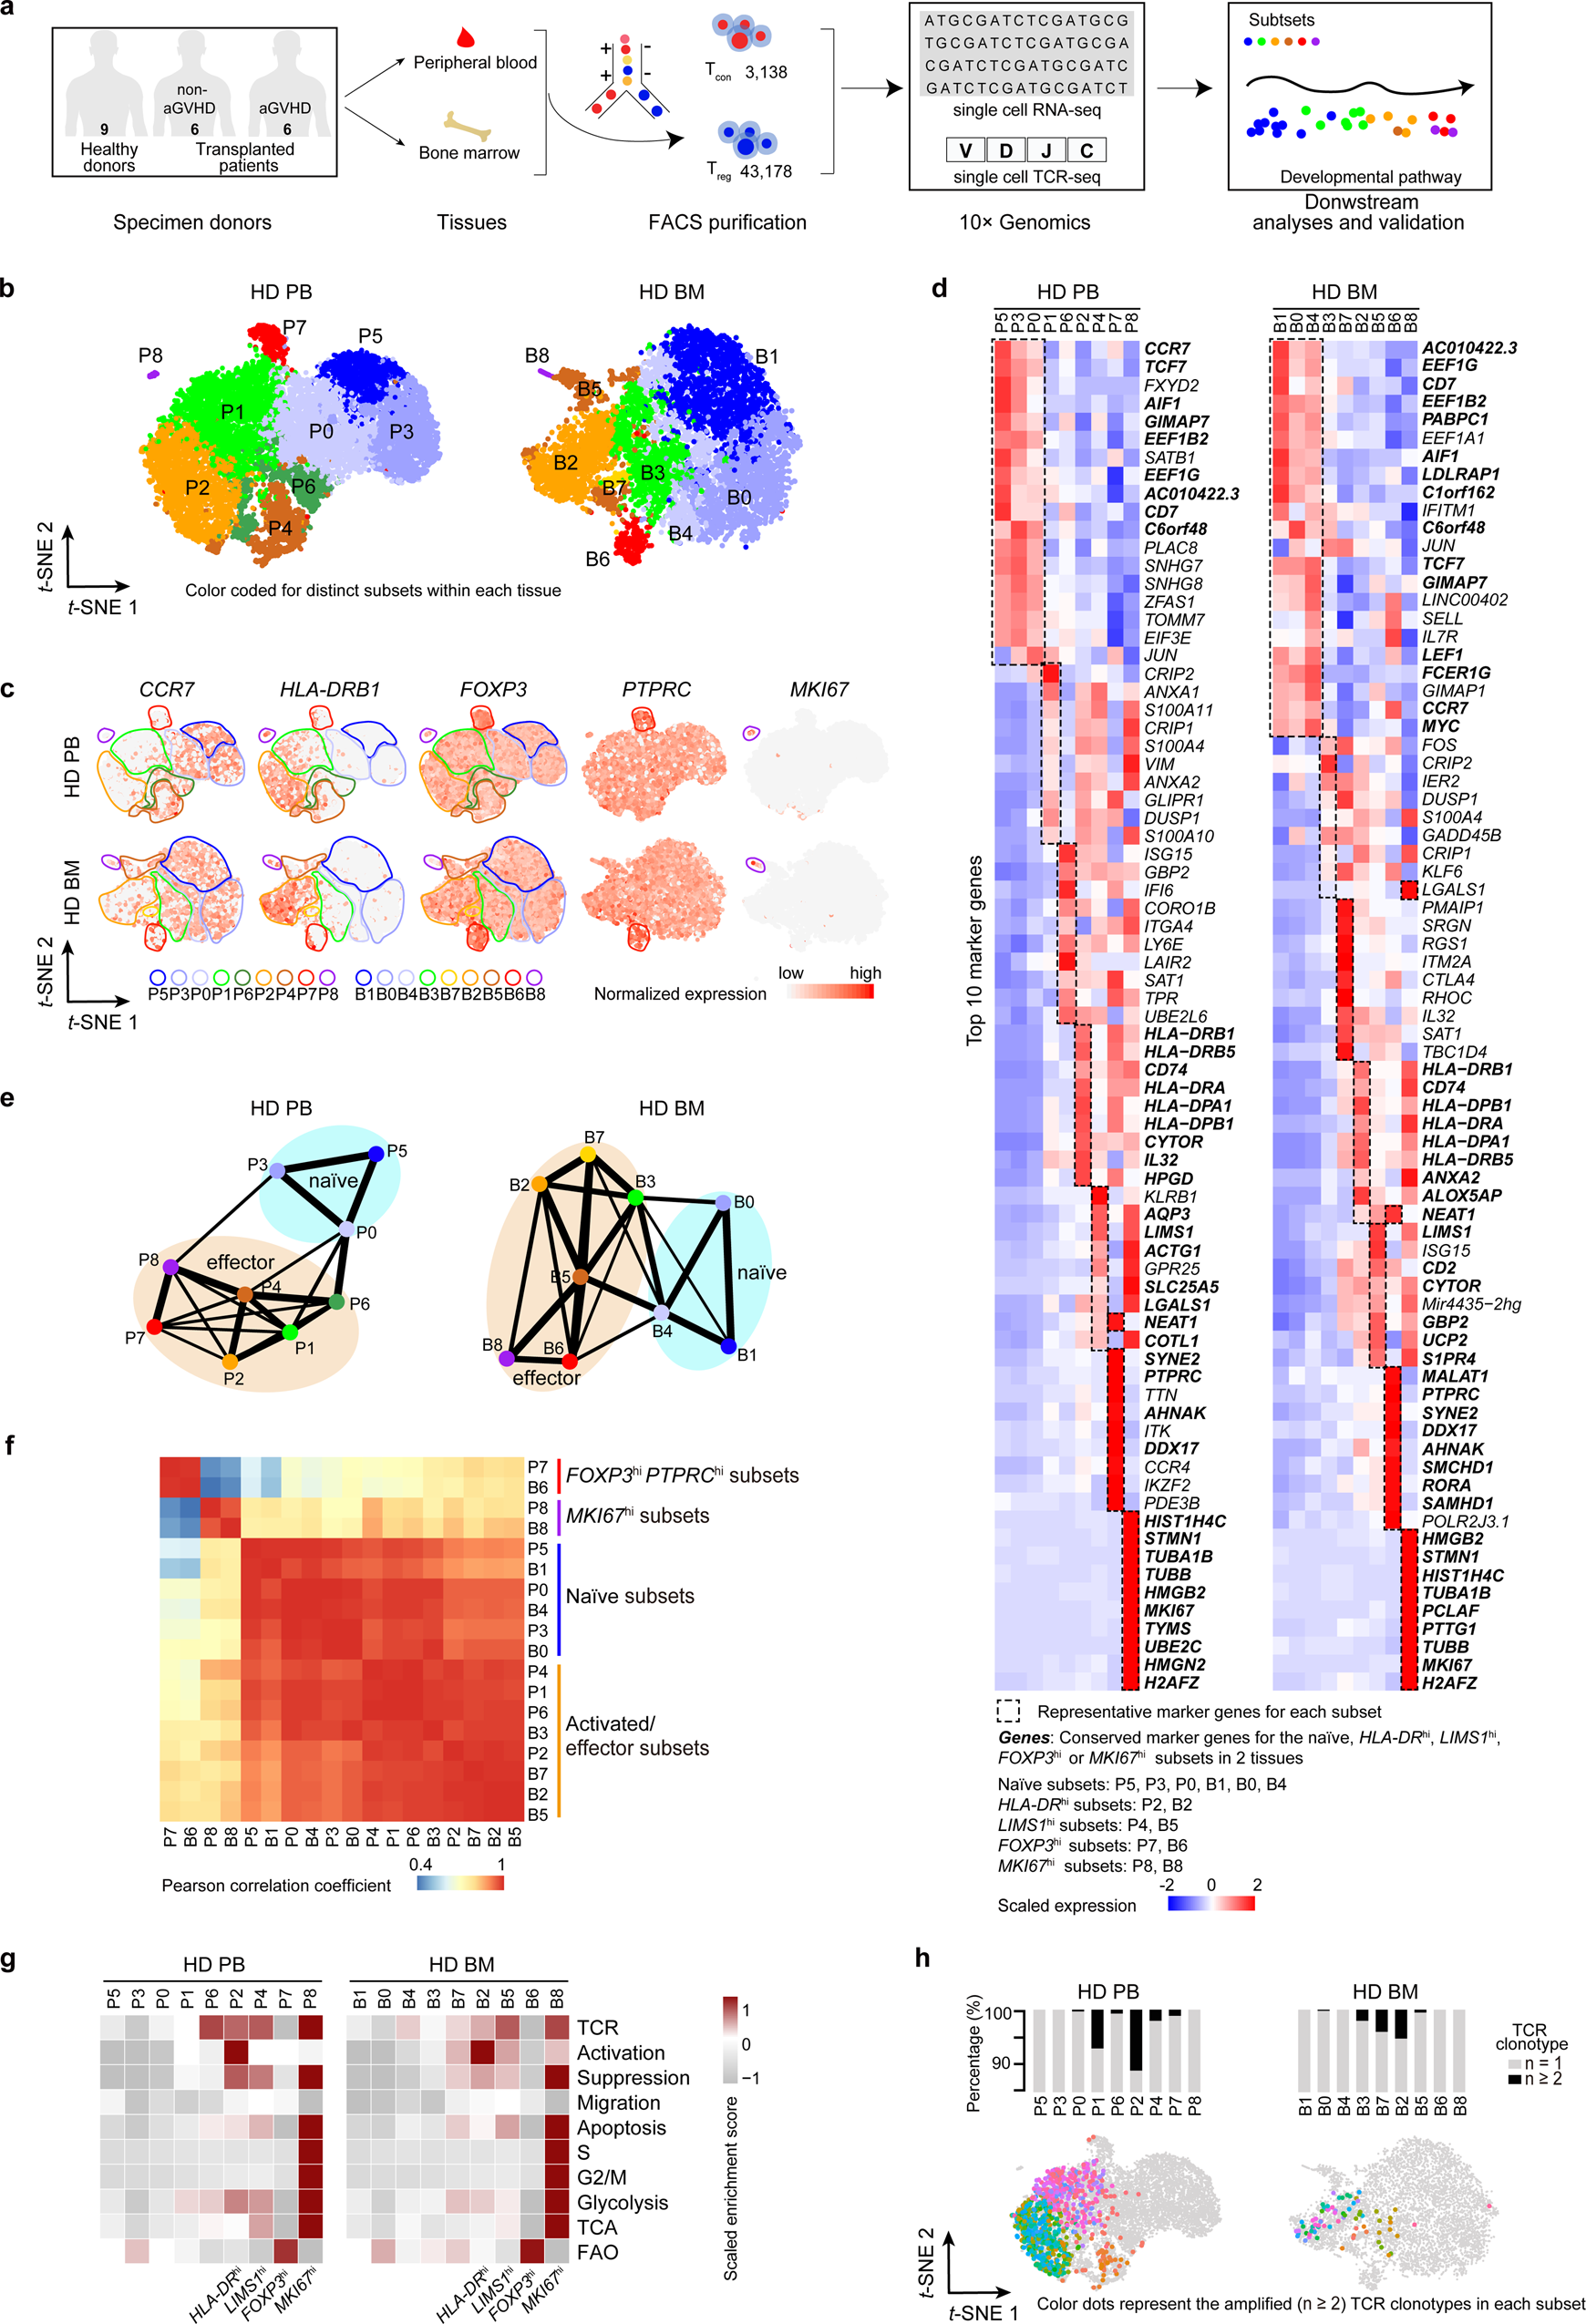 Single-cell transcriptomic analysis reveals disparate effector  differentiation pathways in human Treg compartment | Nature Communications